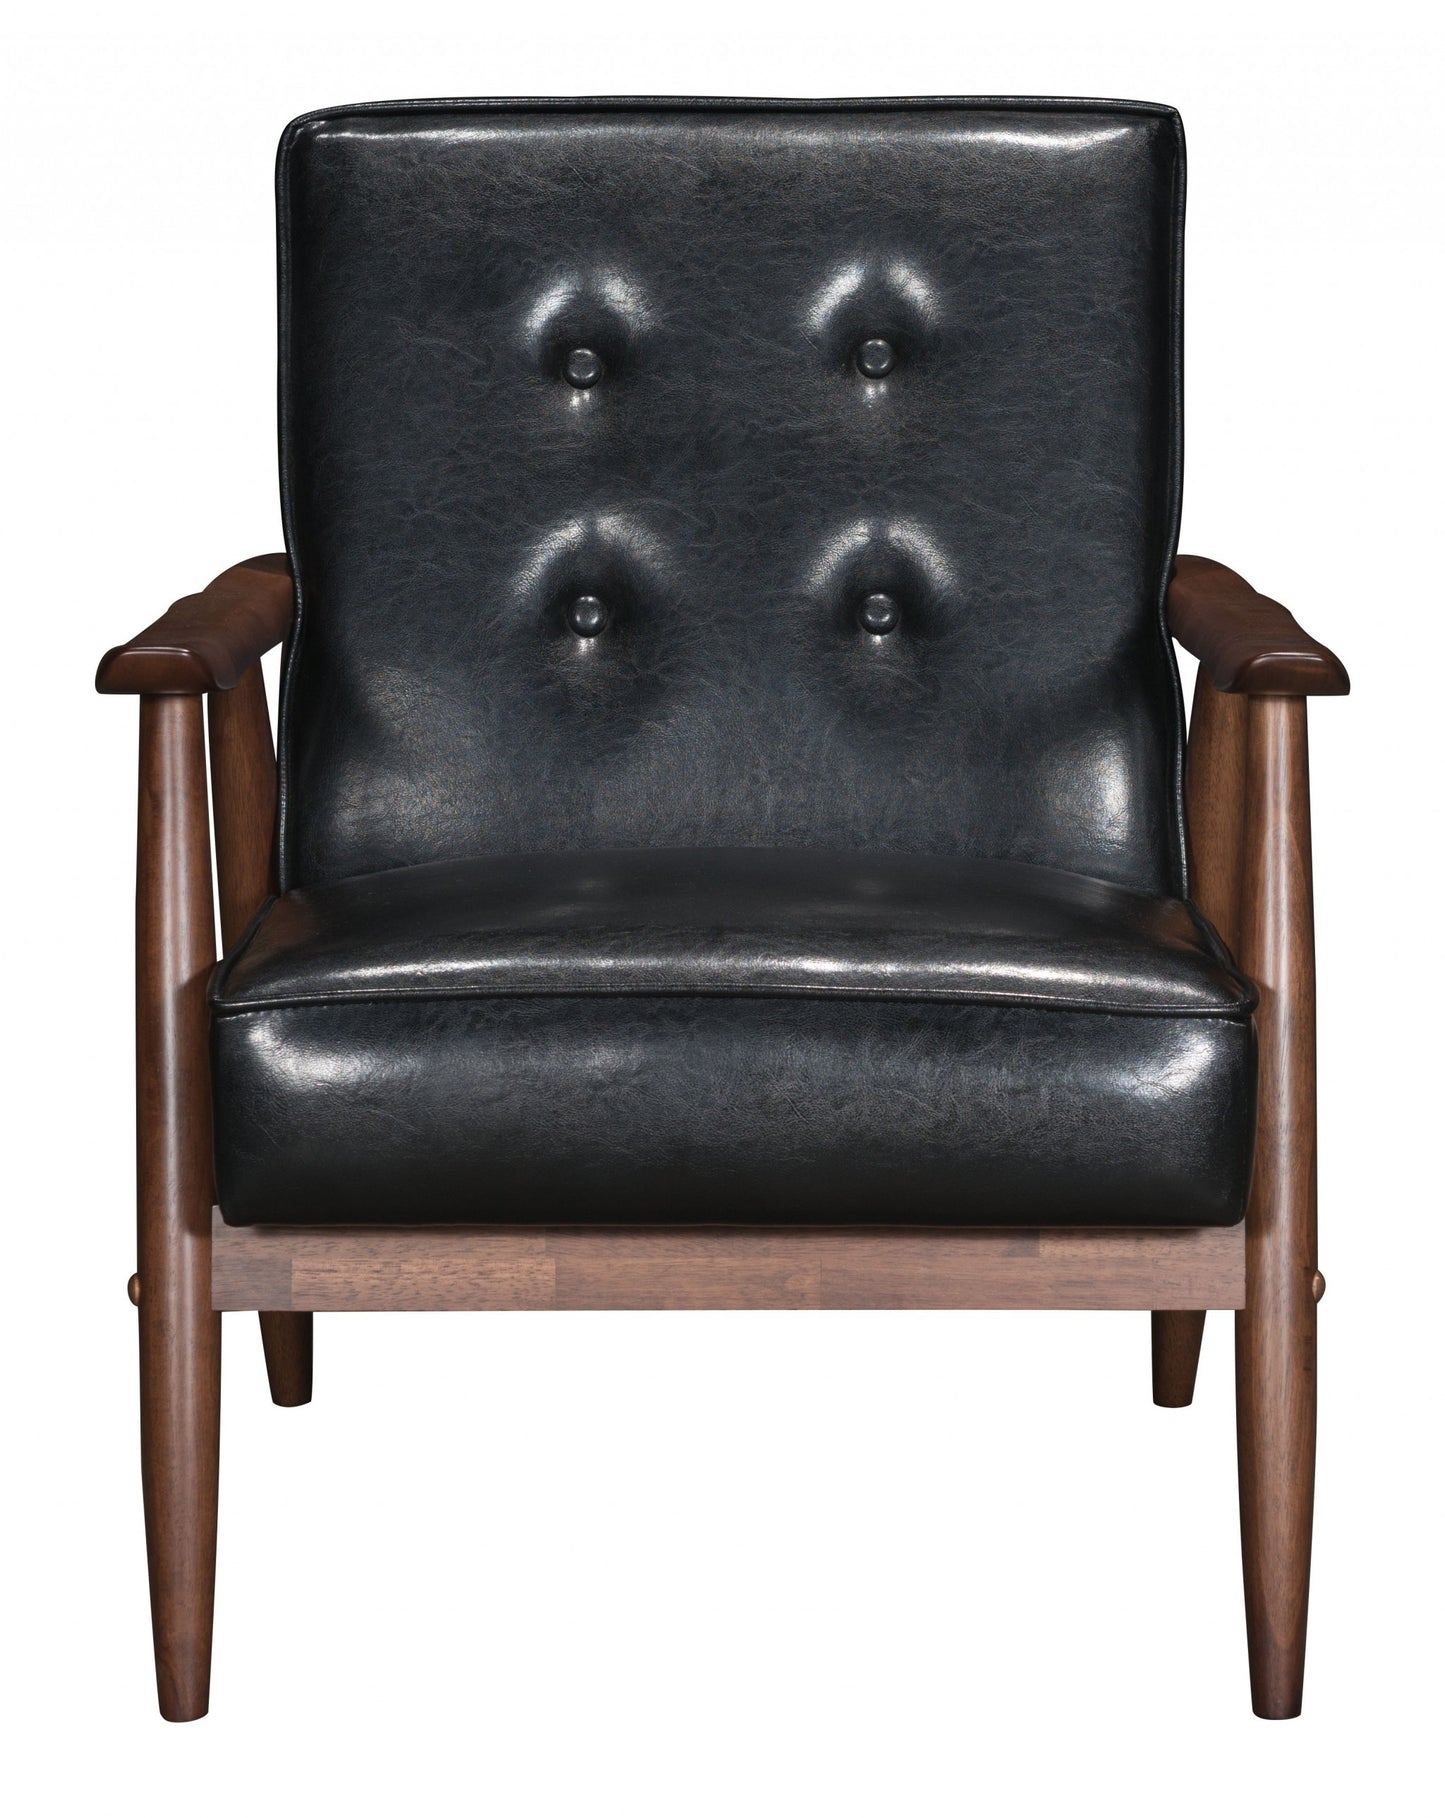 27" Black Faux Leather And Brown Tufted Arm Chair By Homeroots